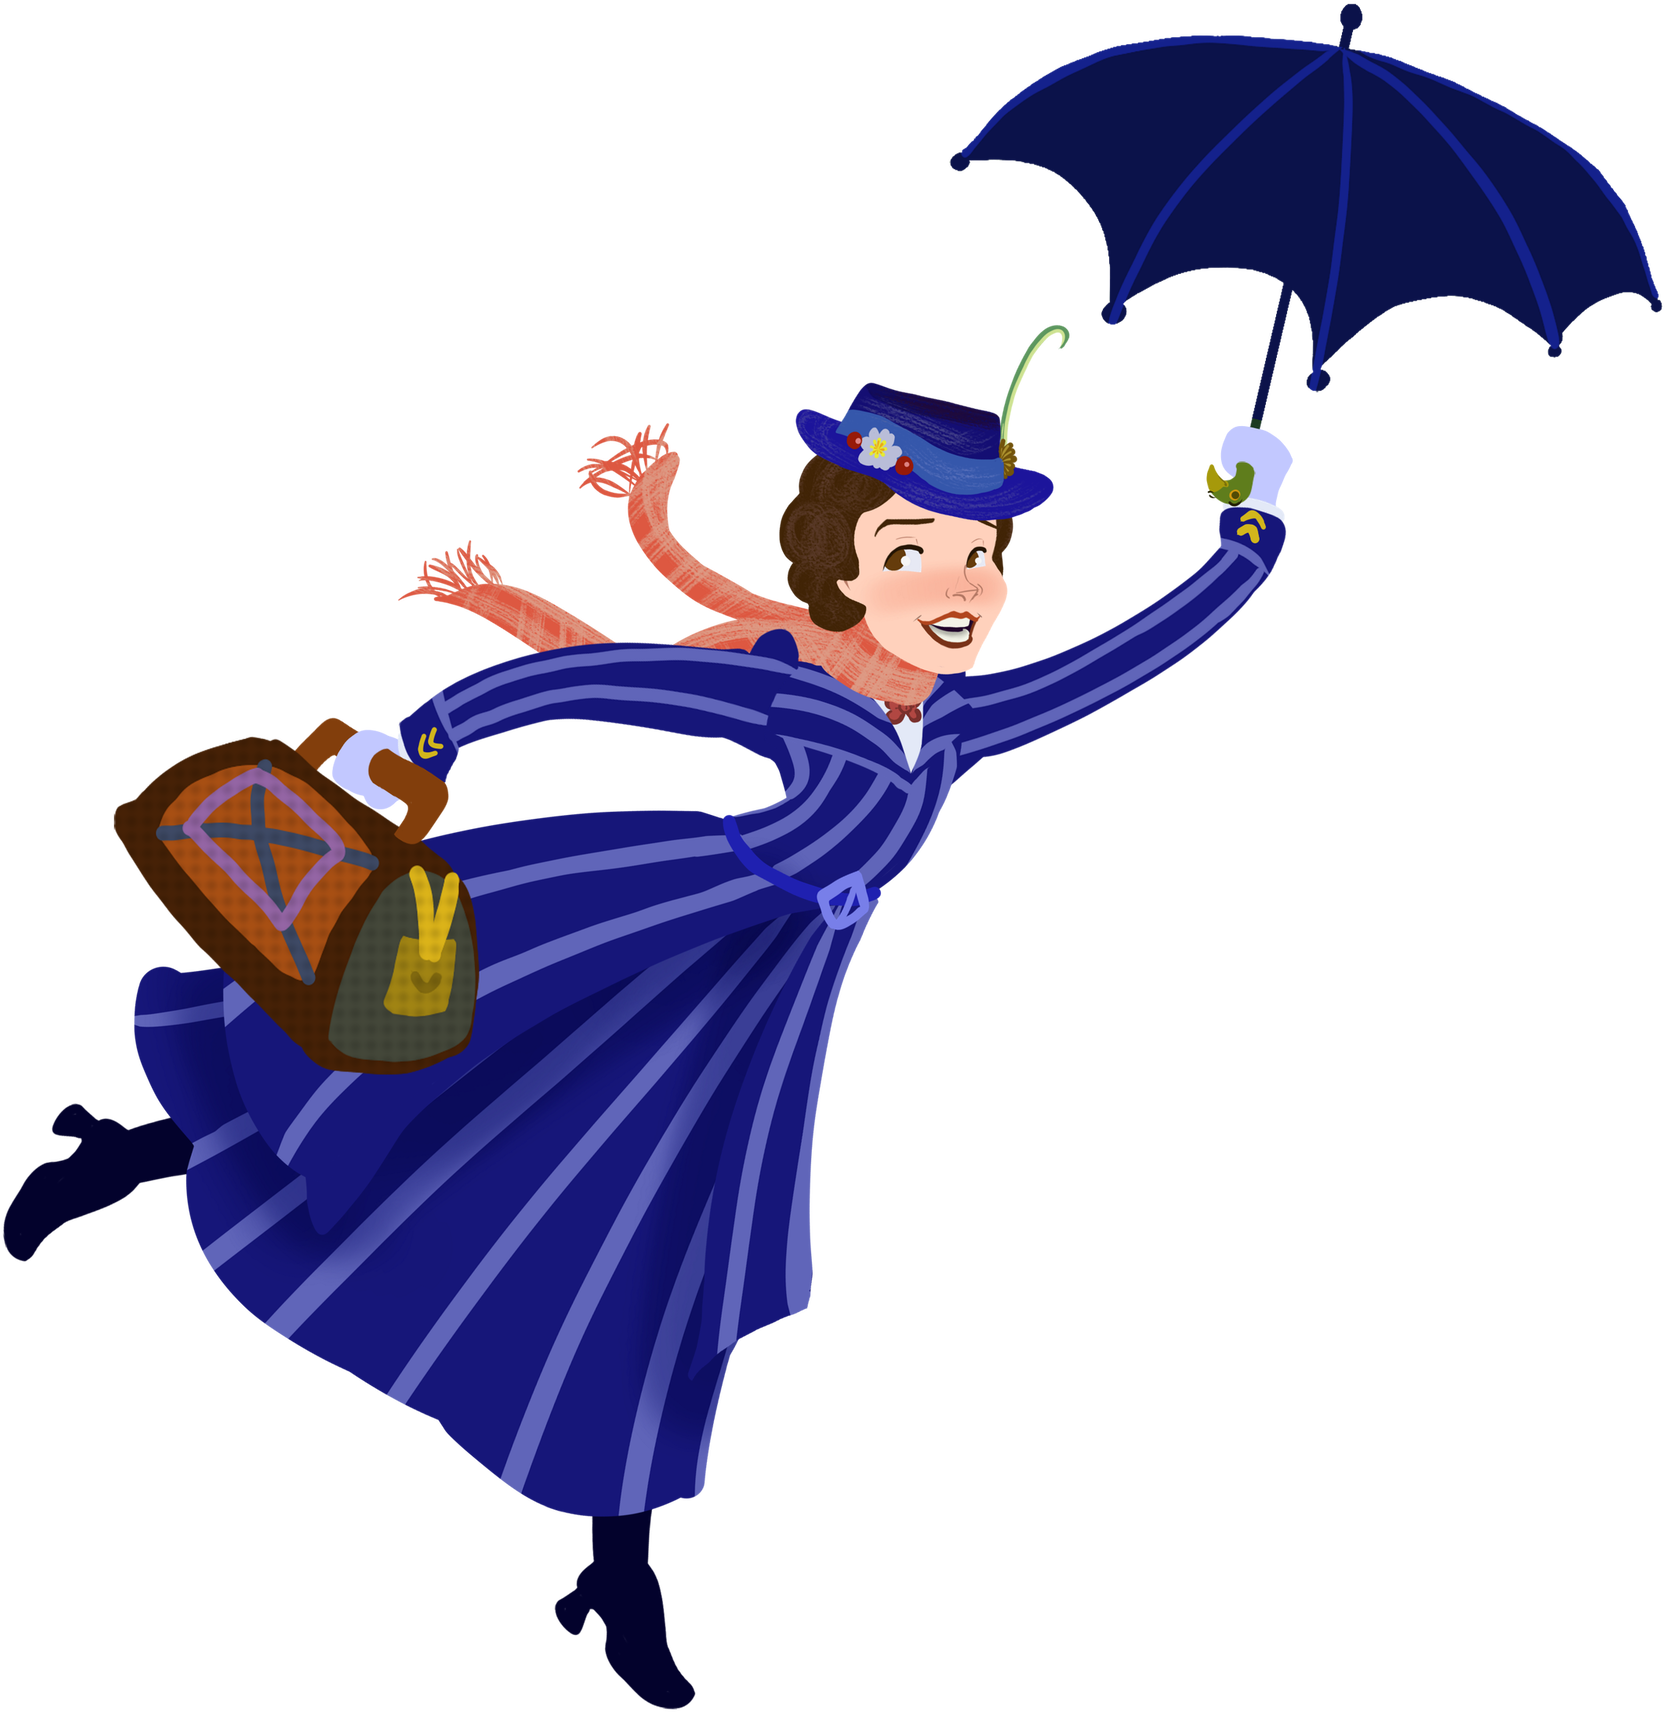 Mary Poppins By Thatjoegunderson Mary Poppins By Thatjoegunderson - Mary Poppins By Thatjoegunderson Mary Poppins By Thatjoegunderson (1920x1920)